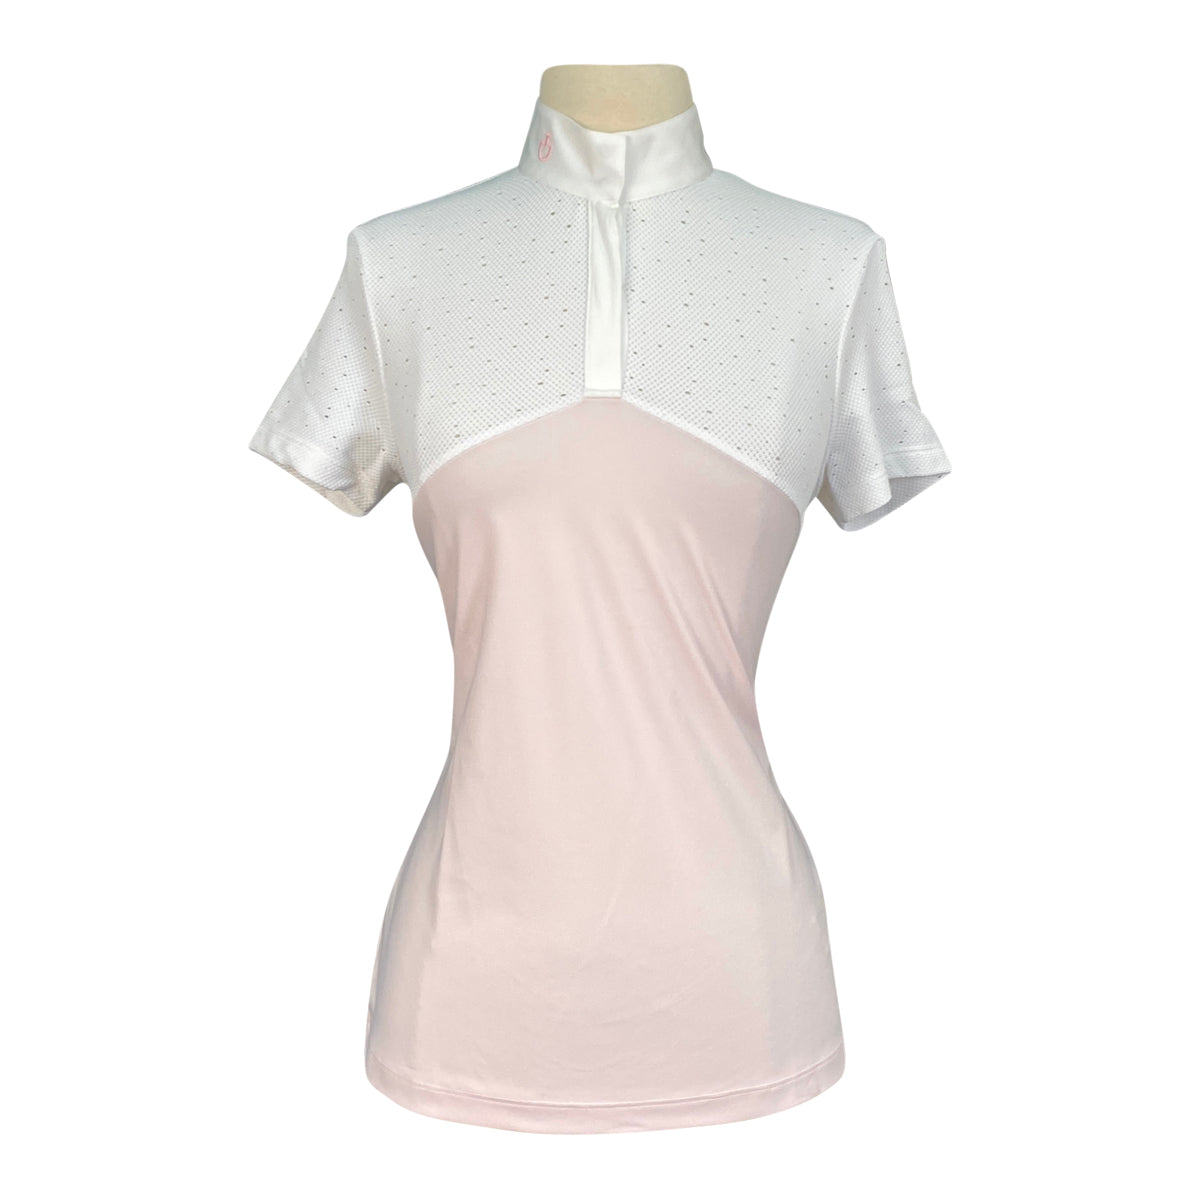 Cavalleria Toscana Crochet S/S Competition Shirt in Pink/White